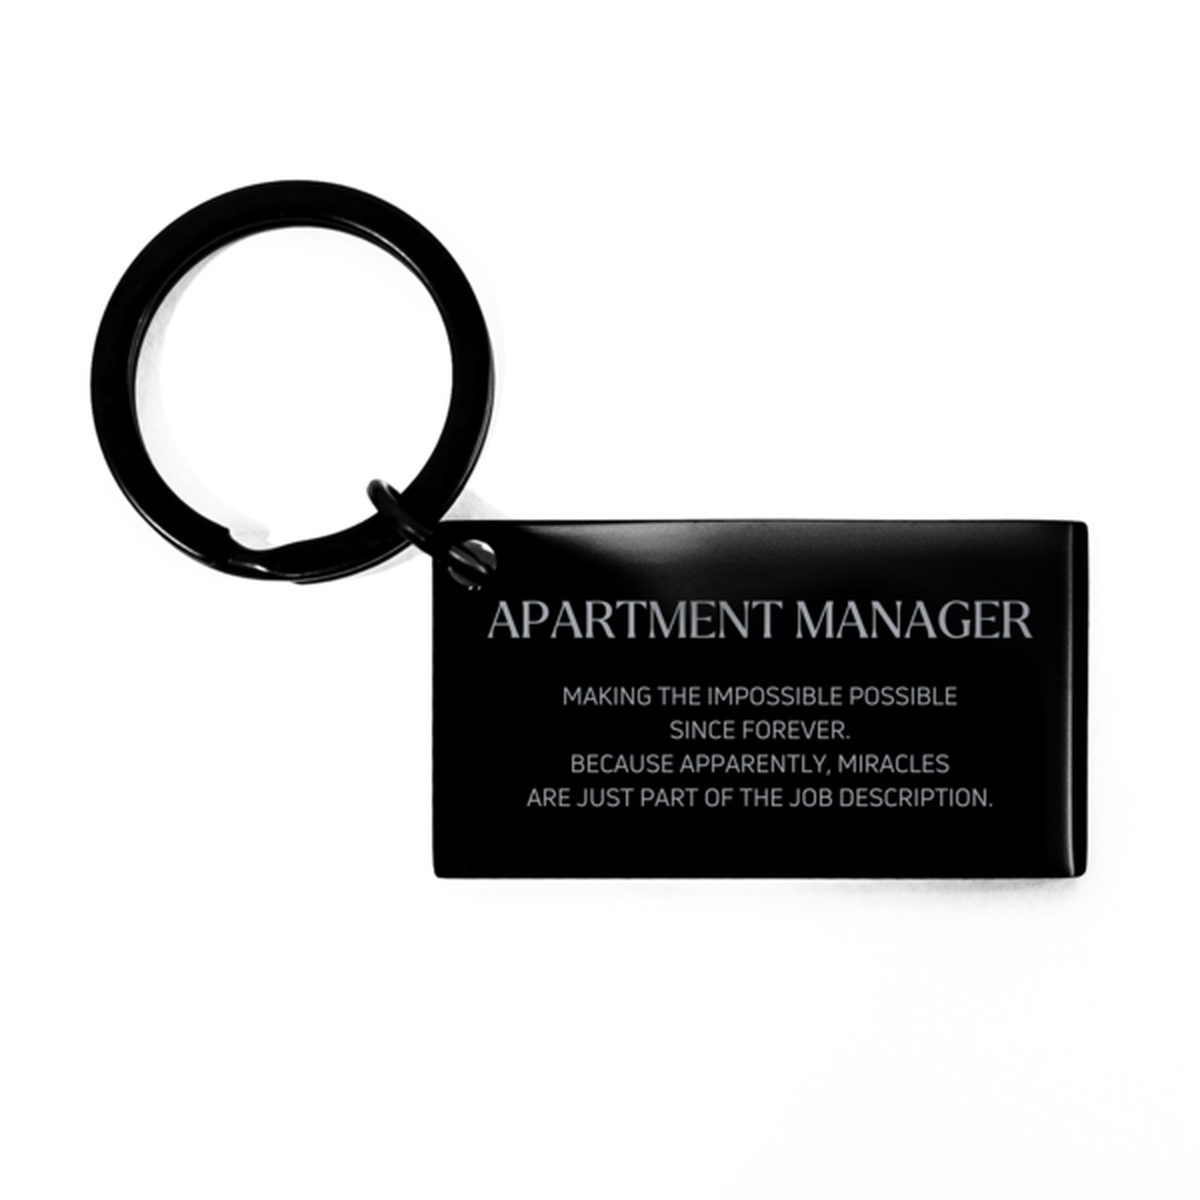 Funny Apartment Manager Gifts, Miracles are just part of the job description, Inspirational Birthday Keychain For Apartment Manager, Men, Women, Coworkers, Friends, Boss